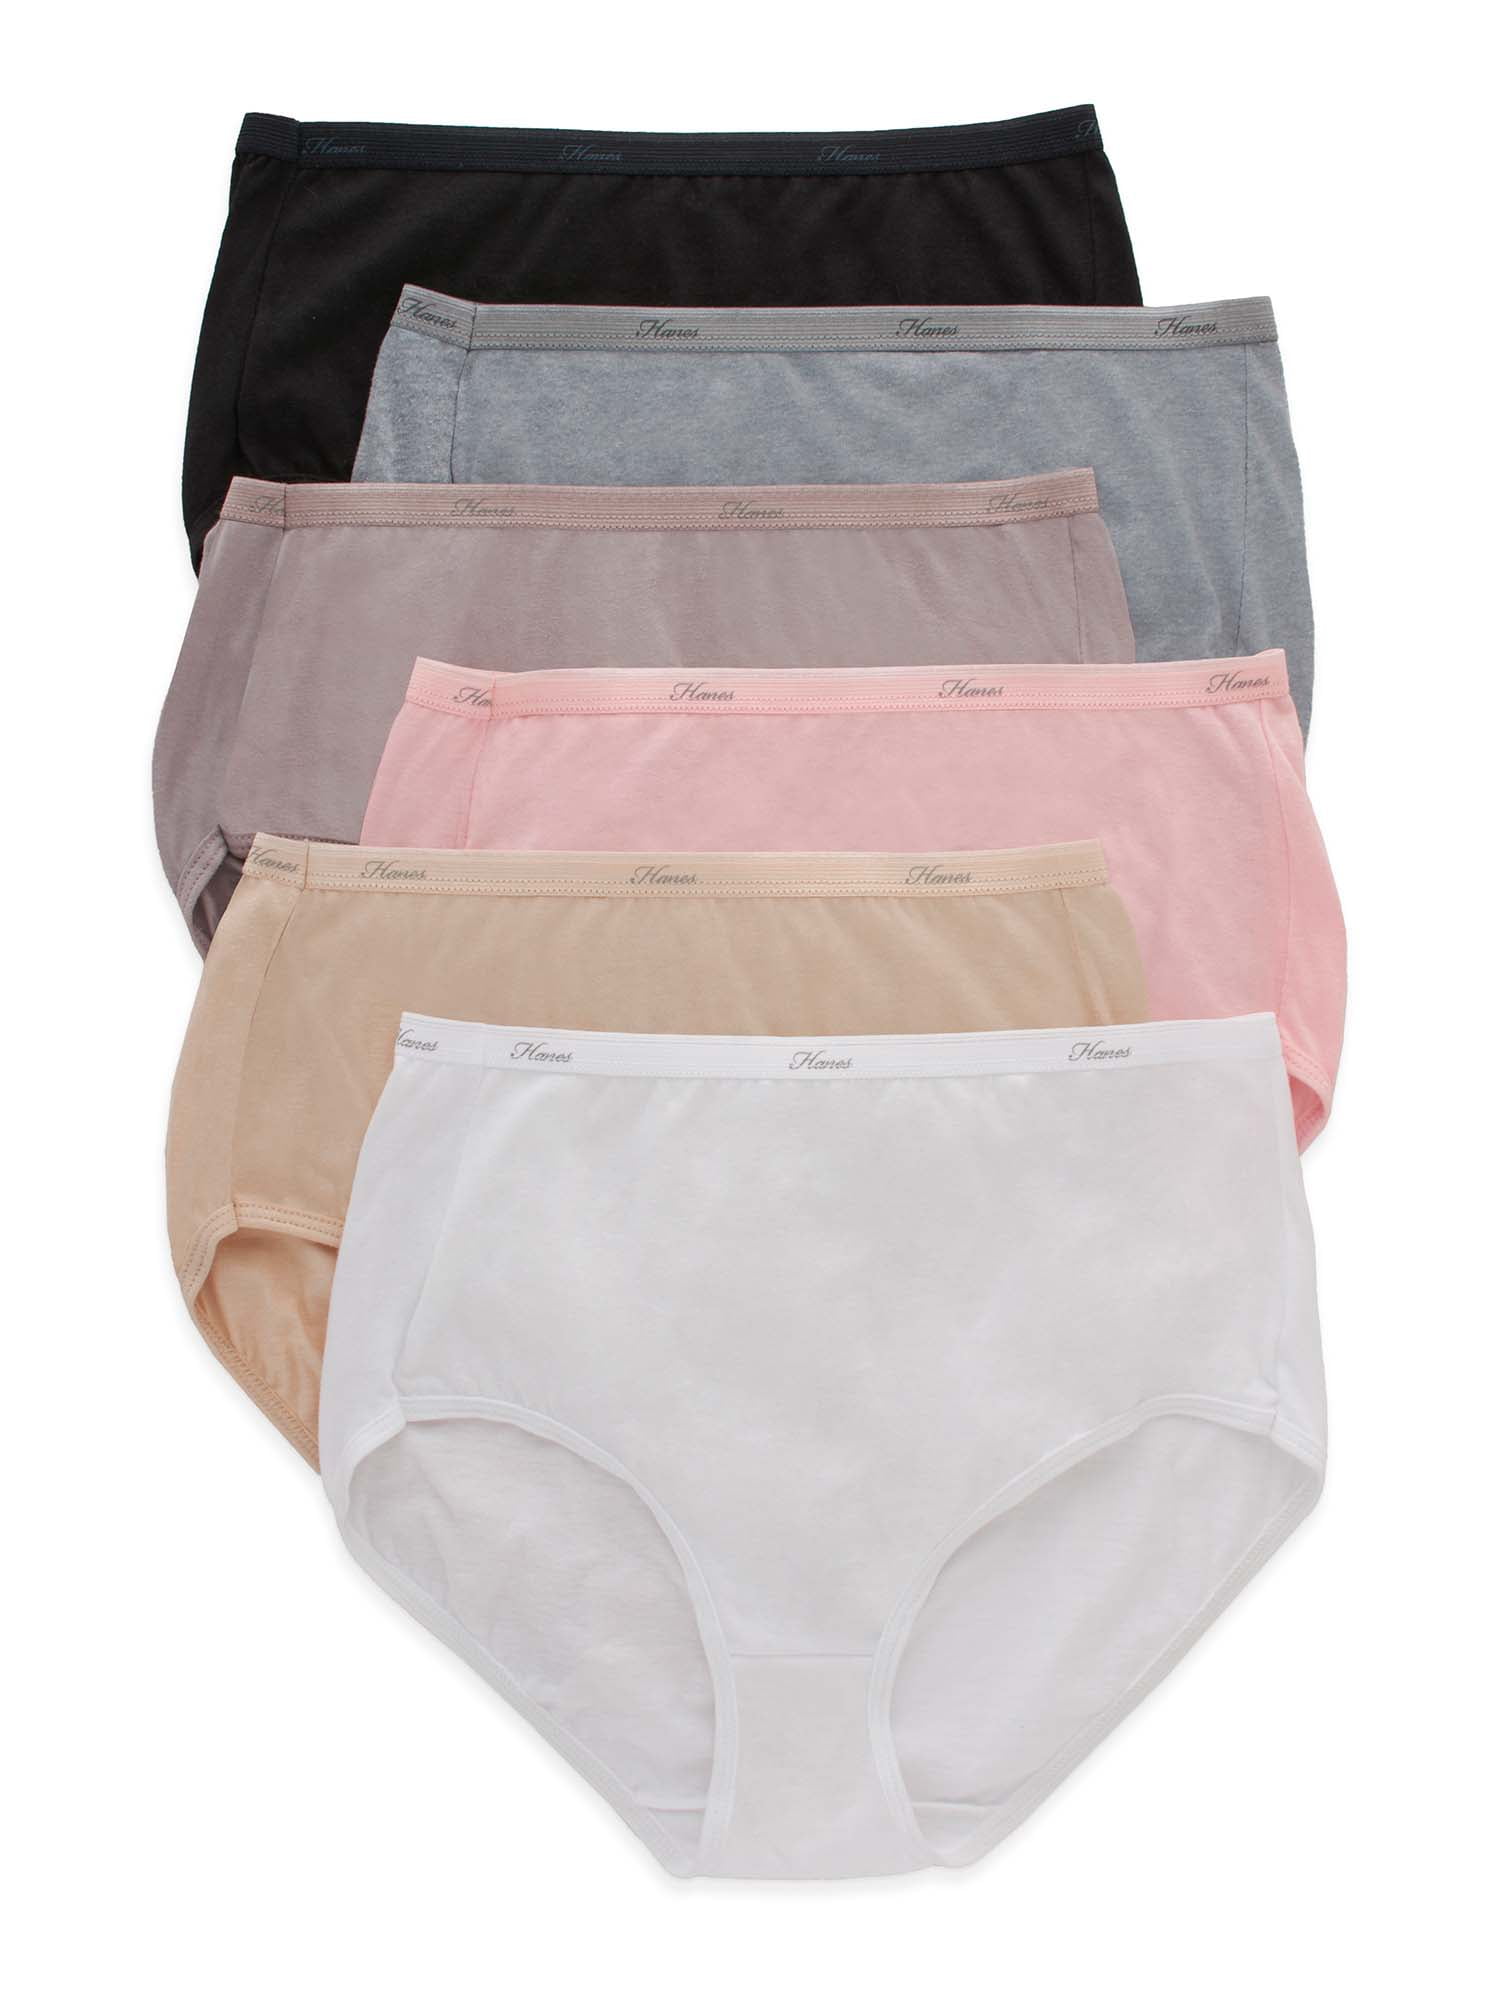 Hanes Women's Cotton Brief Underwear Multi-packs, Available in Regular and  Plus